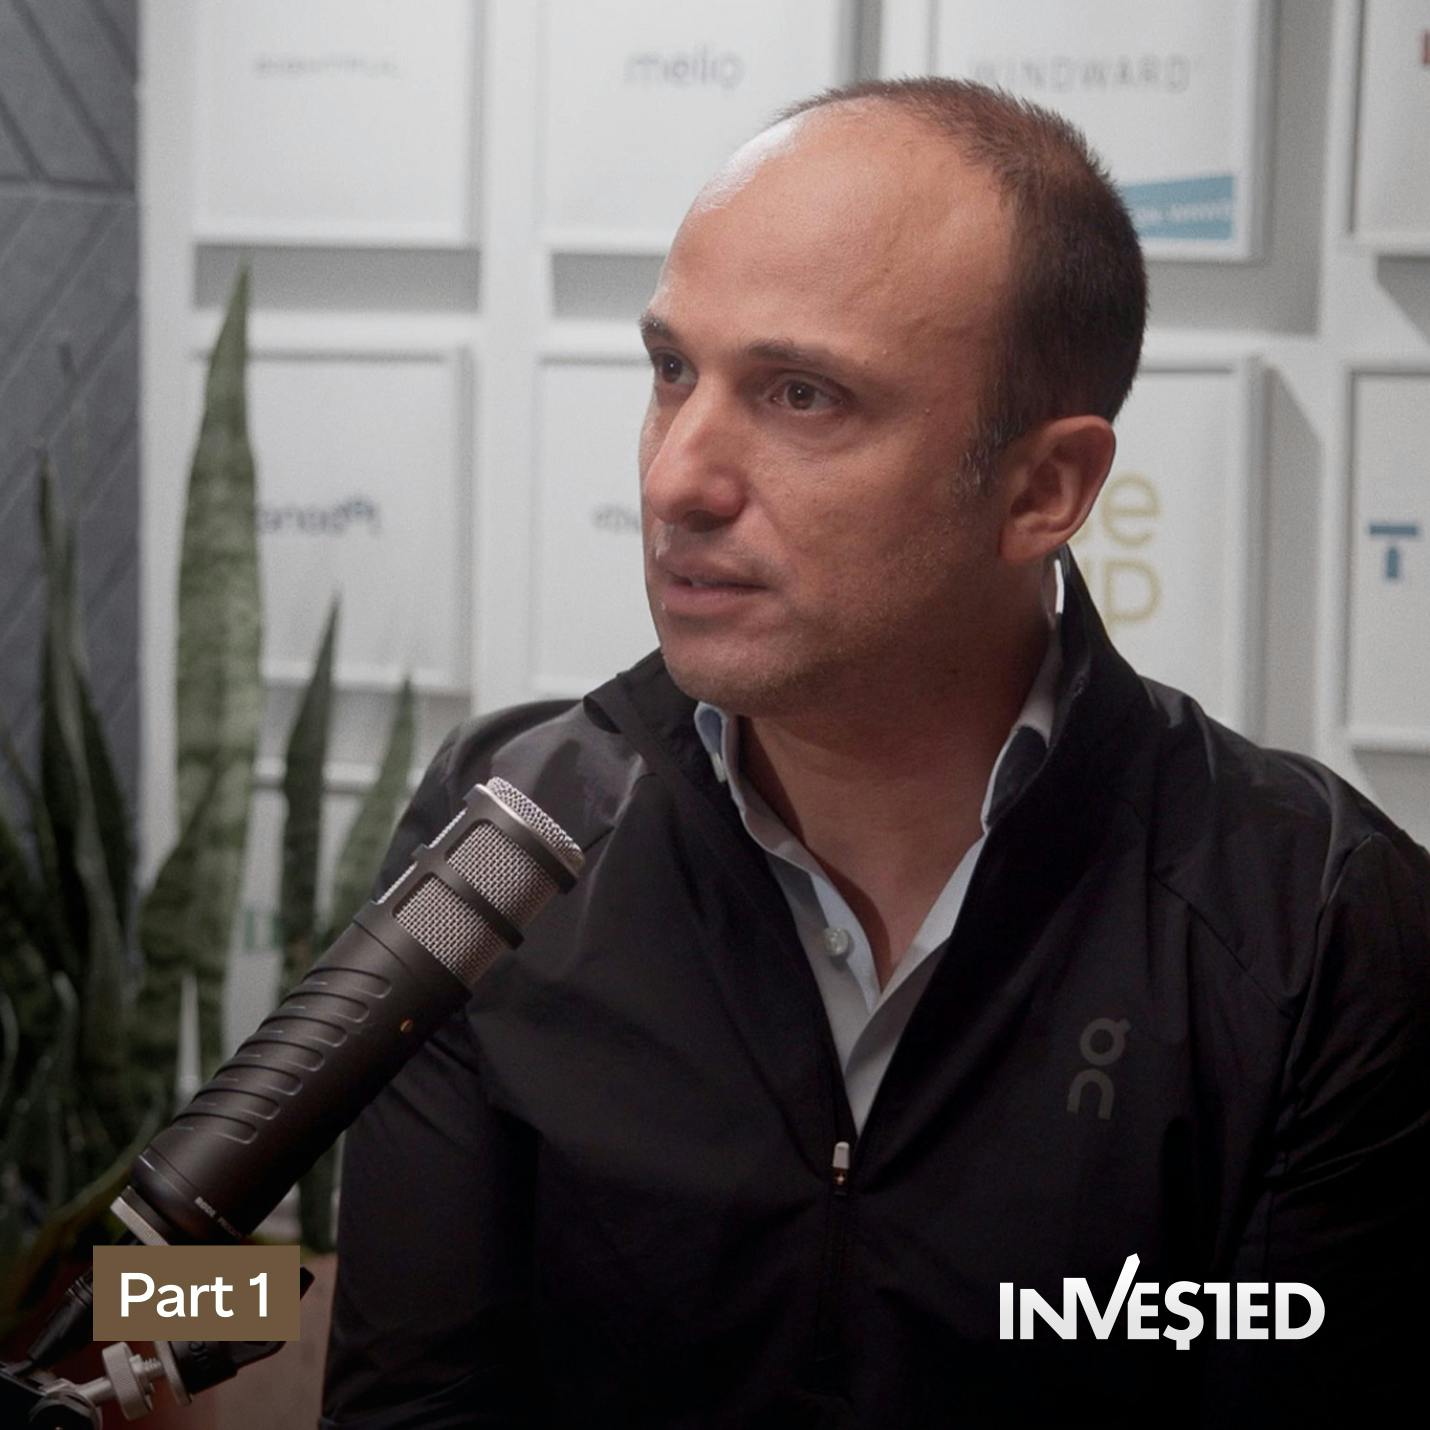 Yonatan Adiri on Founding Healthy.io, Challenges in HealthTech, and Working with Shimon Peres - Part One